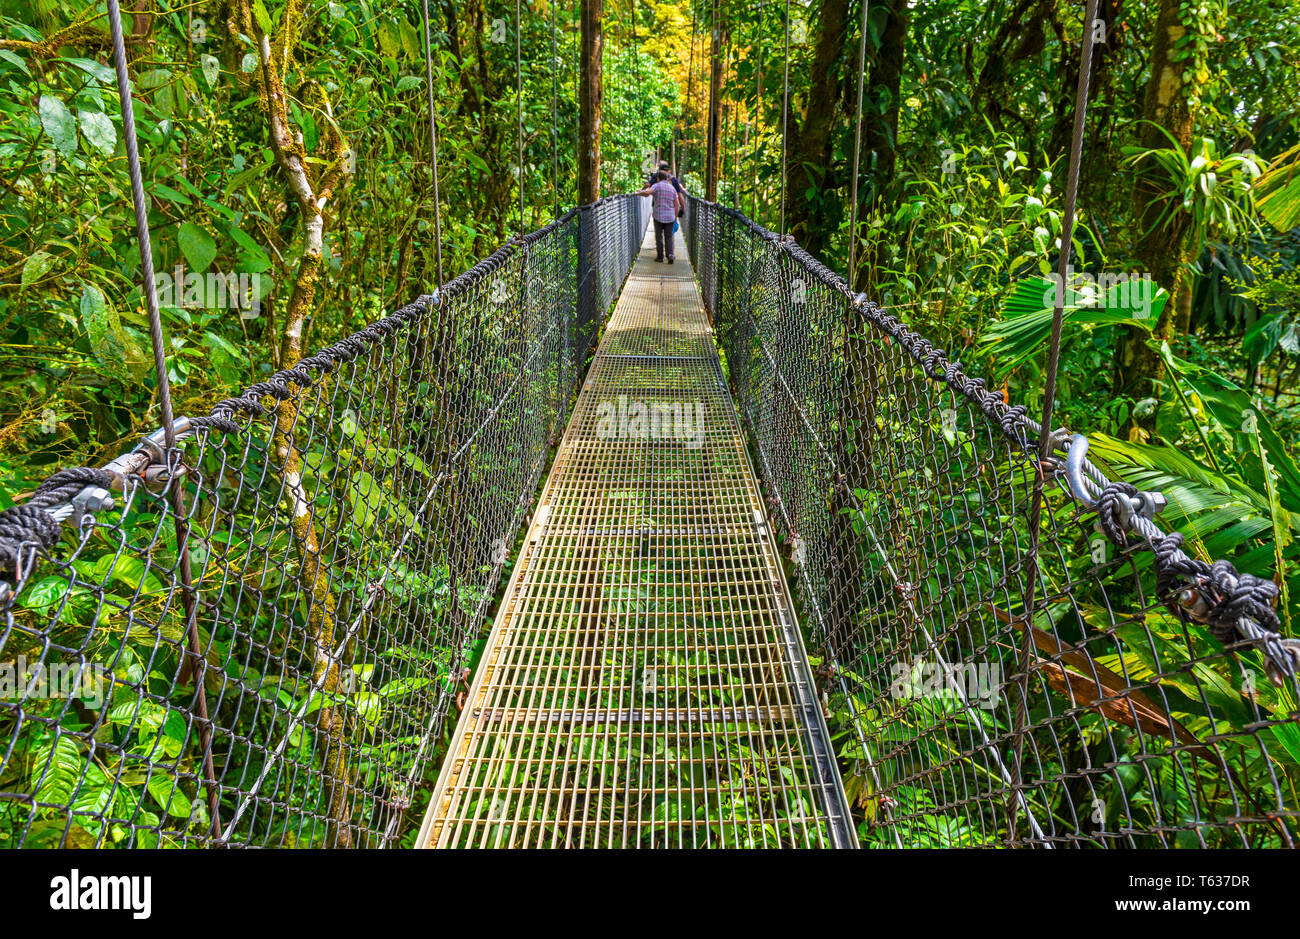 People walking on the Arenal volcano hanging bridges in the tropical rainforest of Costa Rica, Central America. Stock Photo